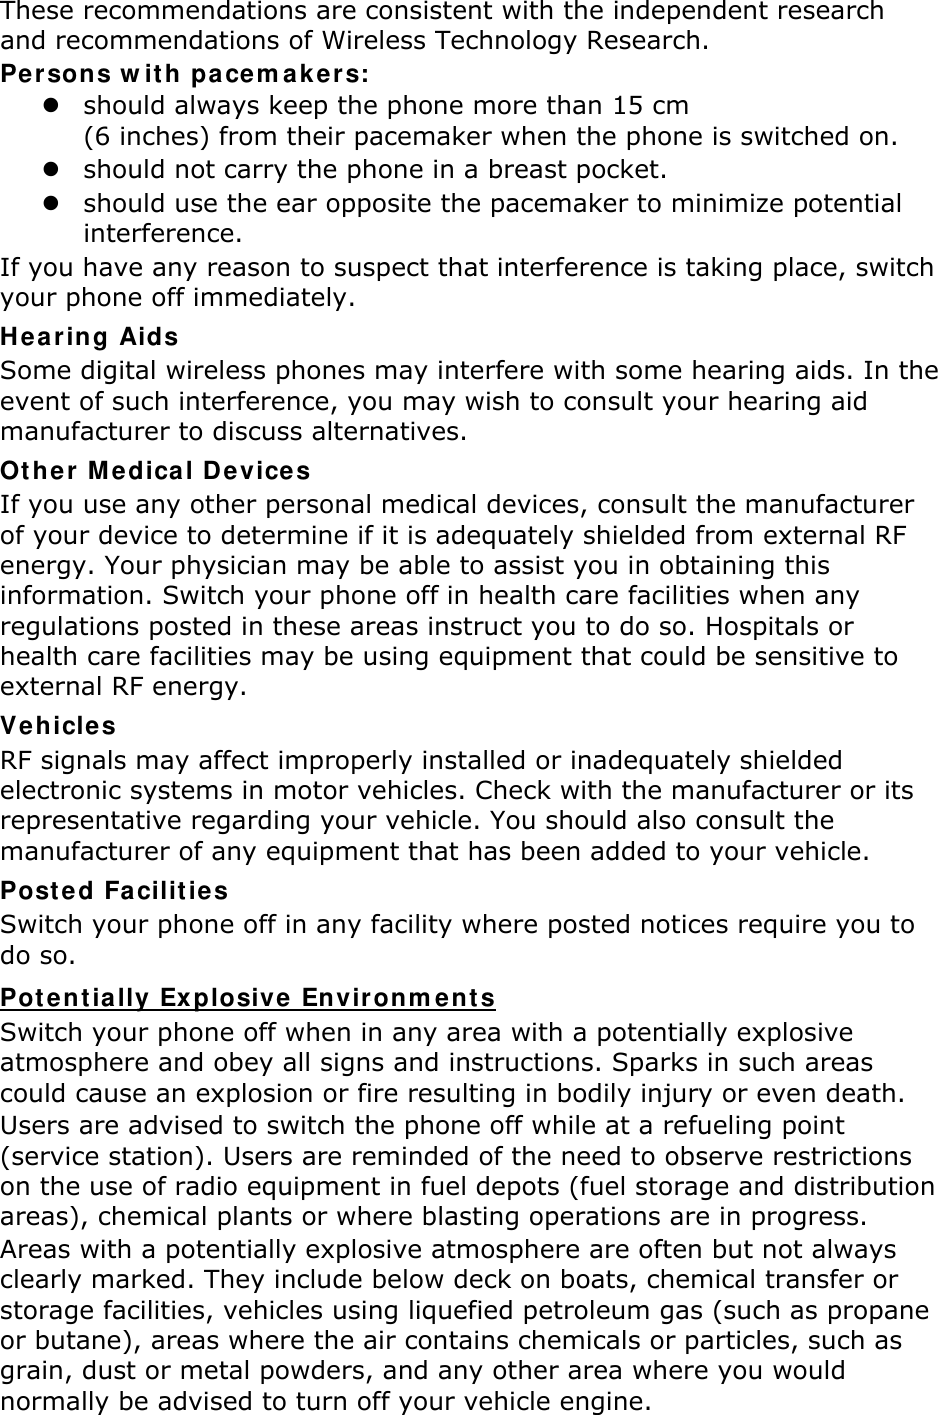 These recommendations are consistent with the independent research and recommendations of Wireless Technology Research. Persons with pacemakers: z should always keep the phone more than 15 cm   (6 inches) from their pacemaker when the phone is switched on. z should not carry the phone in a breast pocket. z should use the ear opposite the pacemaker to minimize potential interference. If you have any reason to suspect that interference is taking place, switch your phone off immediately. Hearing Aids Some digital wireless phones may interfere with some hearing aids. In the event of such interference, you may wish to consult your hearing aid manufacturer to discuss alternatives. Other Medical Devices If you use any other personal medical devices, consult the manufacturer of your device to determine if it is adequately shielded from external RF energy. Your physician may be able to assist you in obtaining this information. Switch your phone off in health care facilities when any regulations posted in these areas instruct you to do so. Hospitals or health care facilities may be using equipment that could be sensitive to external RF energy. Vehicles RF signals may affect improperly installed or inadequately shielded electronic systems in motor vehicles. Check with the manufacturer or its representative regarding your vehicle. You should also consult the manufacturer of any equipment that has been added to your vehicle. Posted Facilities Switch your phone off in any facility where posted notices require you to do so. Potentially Explosive Environments Switch your phone off when in any area with a potentially explosive atmosphere and obey all signs and instructions. Sparks in such areas could cause an explosion or fire resulting in bodily injury or even death. Users are advised to switch the phone off while at a refueling point (service station). Users are reminded of the need to observe restrictions on the use of radio equipment in fuel depots (fuel storage and distribution areas), chemical plants or where blasting operations are in progress. Areas with a potentially explosive atmosphere are often but not always clearly marked. They include below deck on boats, chemical transfer or storage facilities, vehicles using liquefied petroleum gas (such as propane or butane), areas where the air contains chemicals or particles, such as grain, dust or metal powders, and any other area where you would normally be advised to turn off your vehicle engine. 